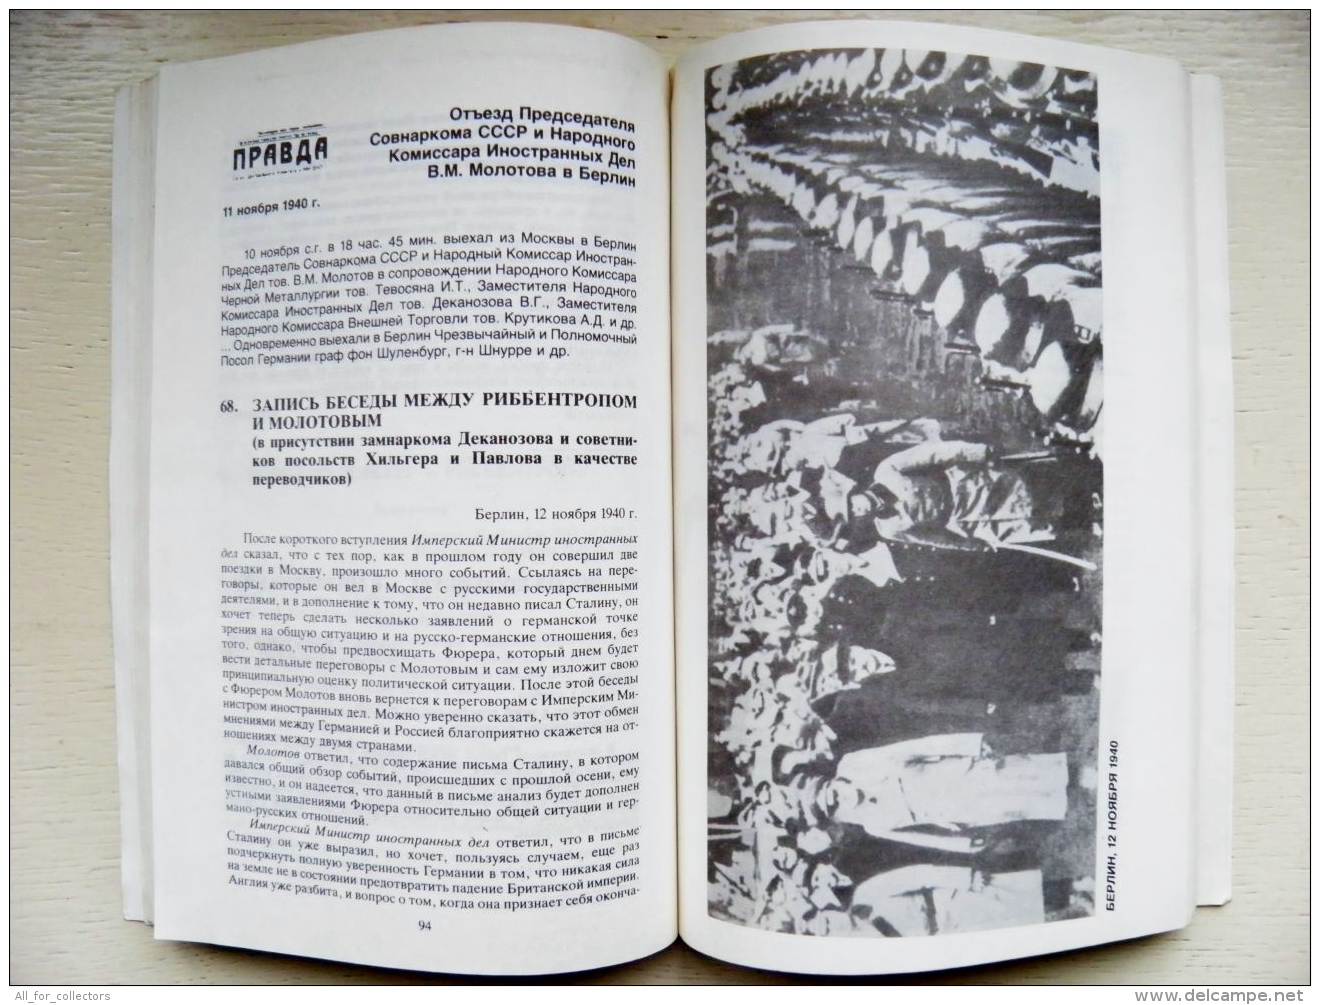 8 scans book USSR-Germany 1939-1941 diplomatic documents in russian stalin hitler ribbentrop molotov history